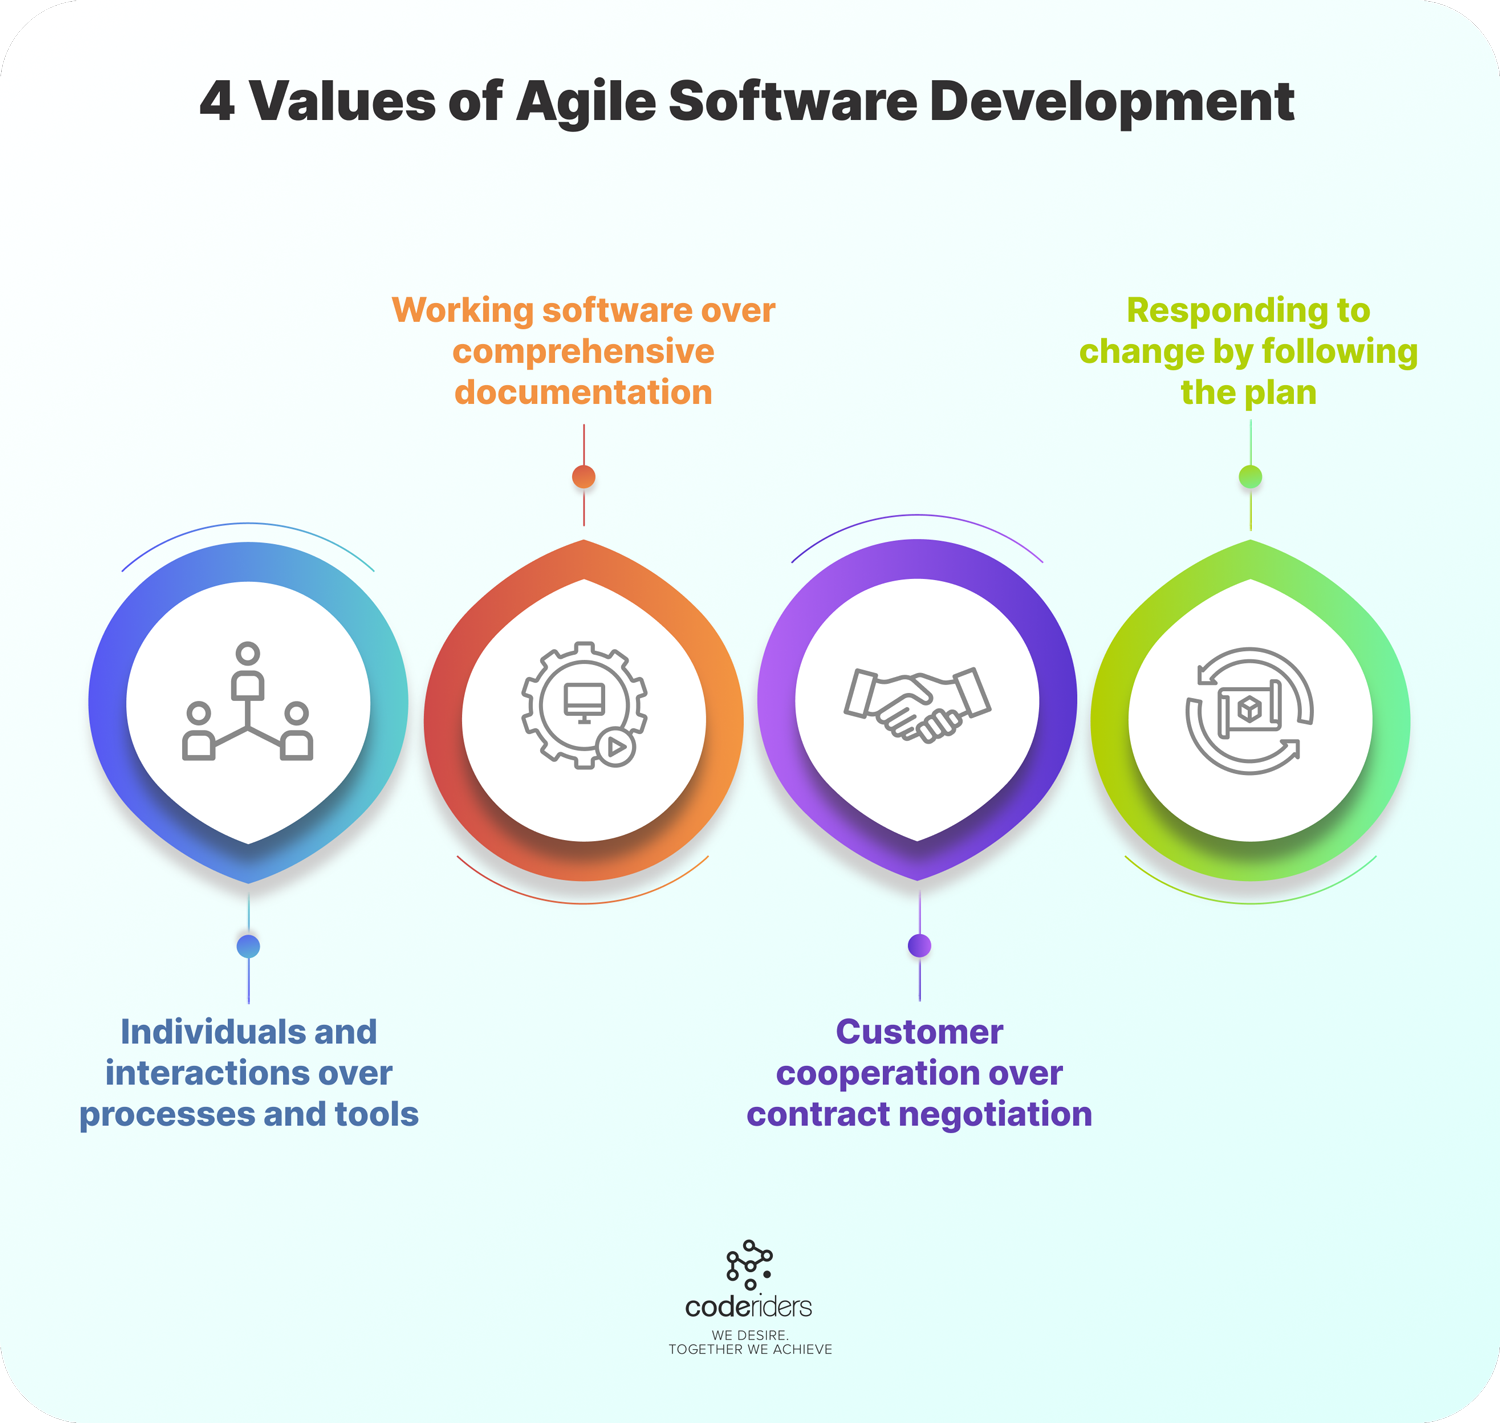 Agile software development chooses change over fixed software outsourcing plan, communication over complicated software documentation, individuals over tools and customer cooperation over contract. These are 4 values of Agile 